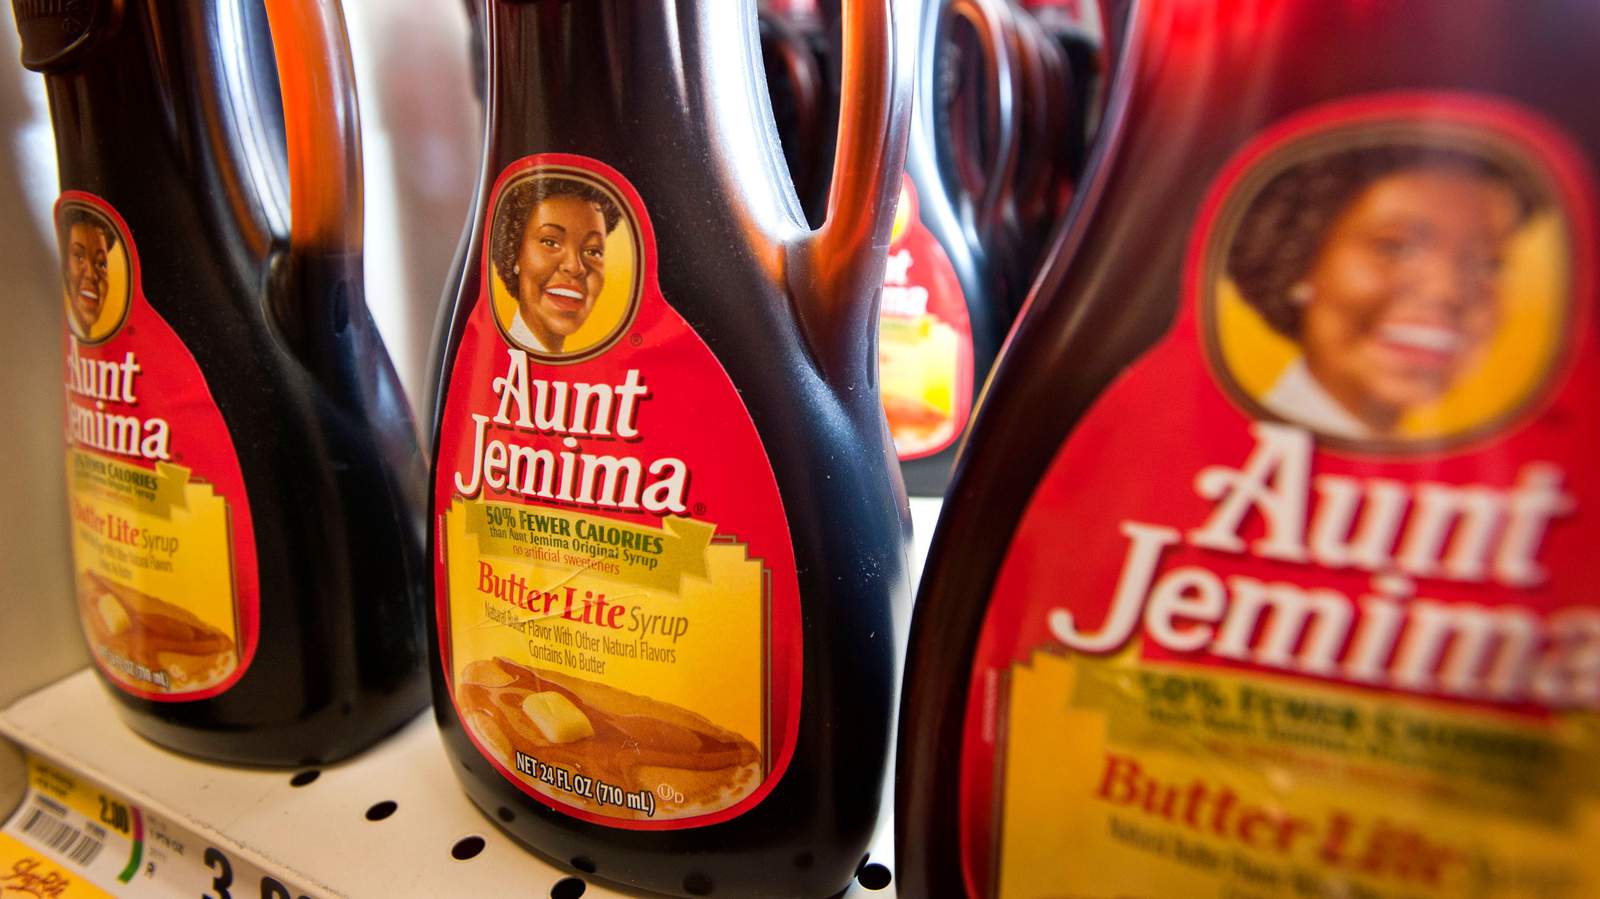 Aunt Jemima brand changing name, image after acknowledging racial stereotype